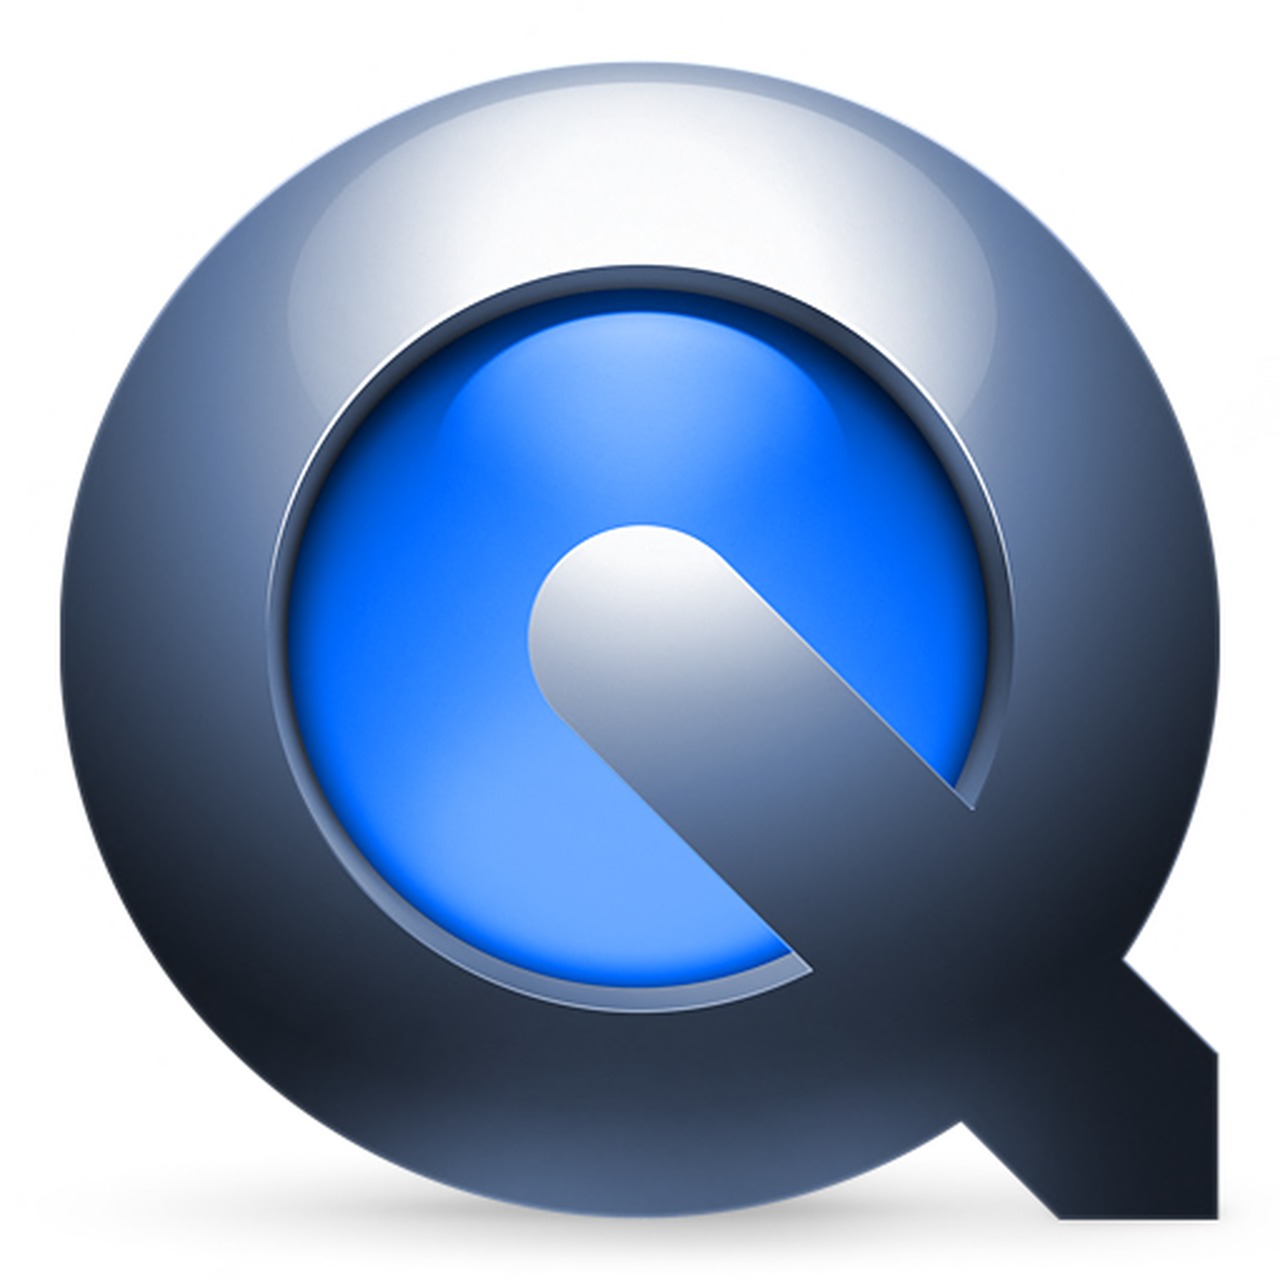 quicktime player for windows 10 free download